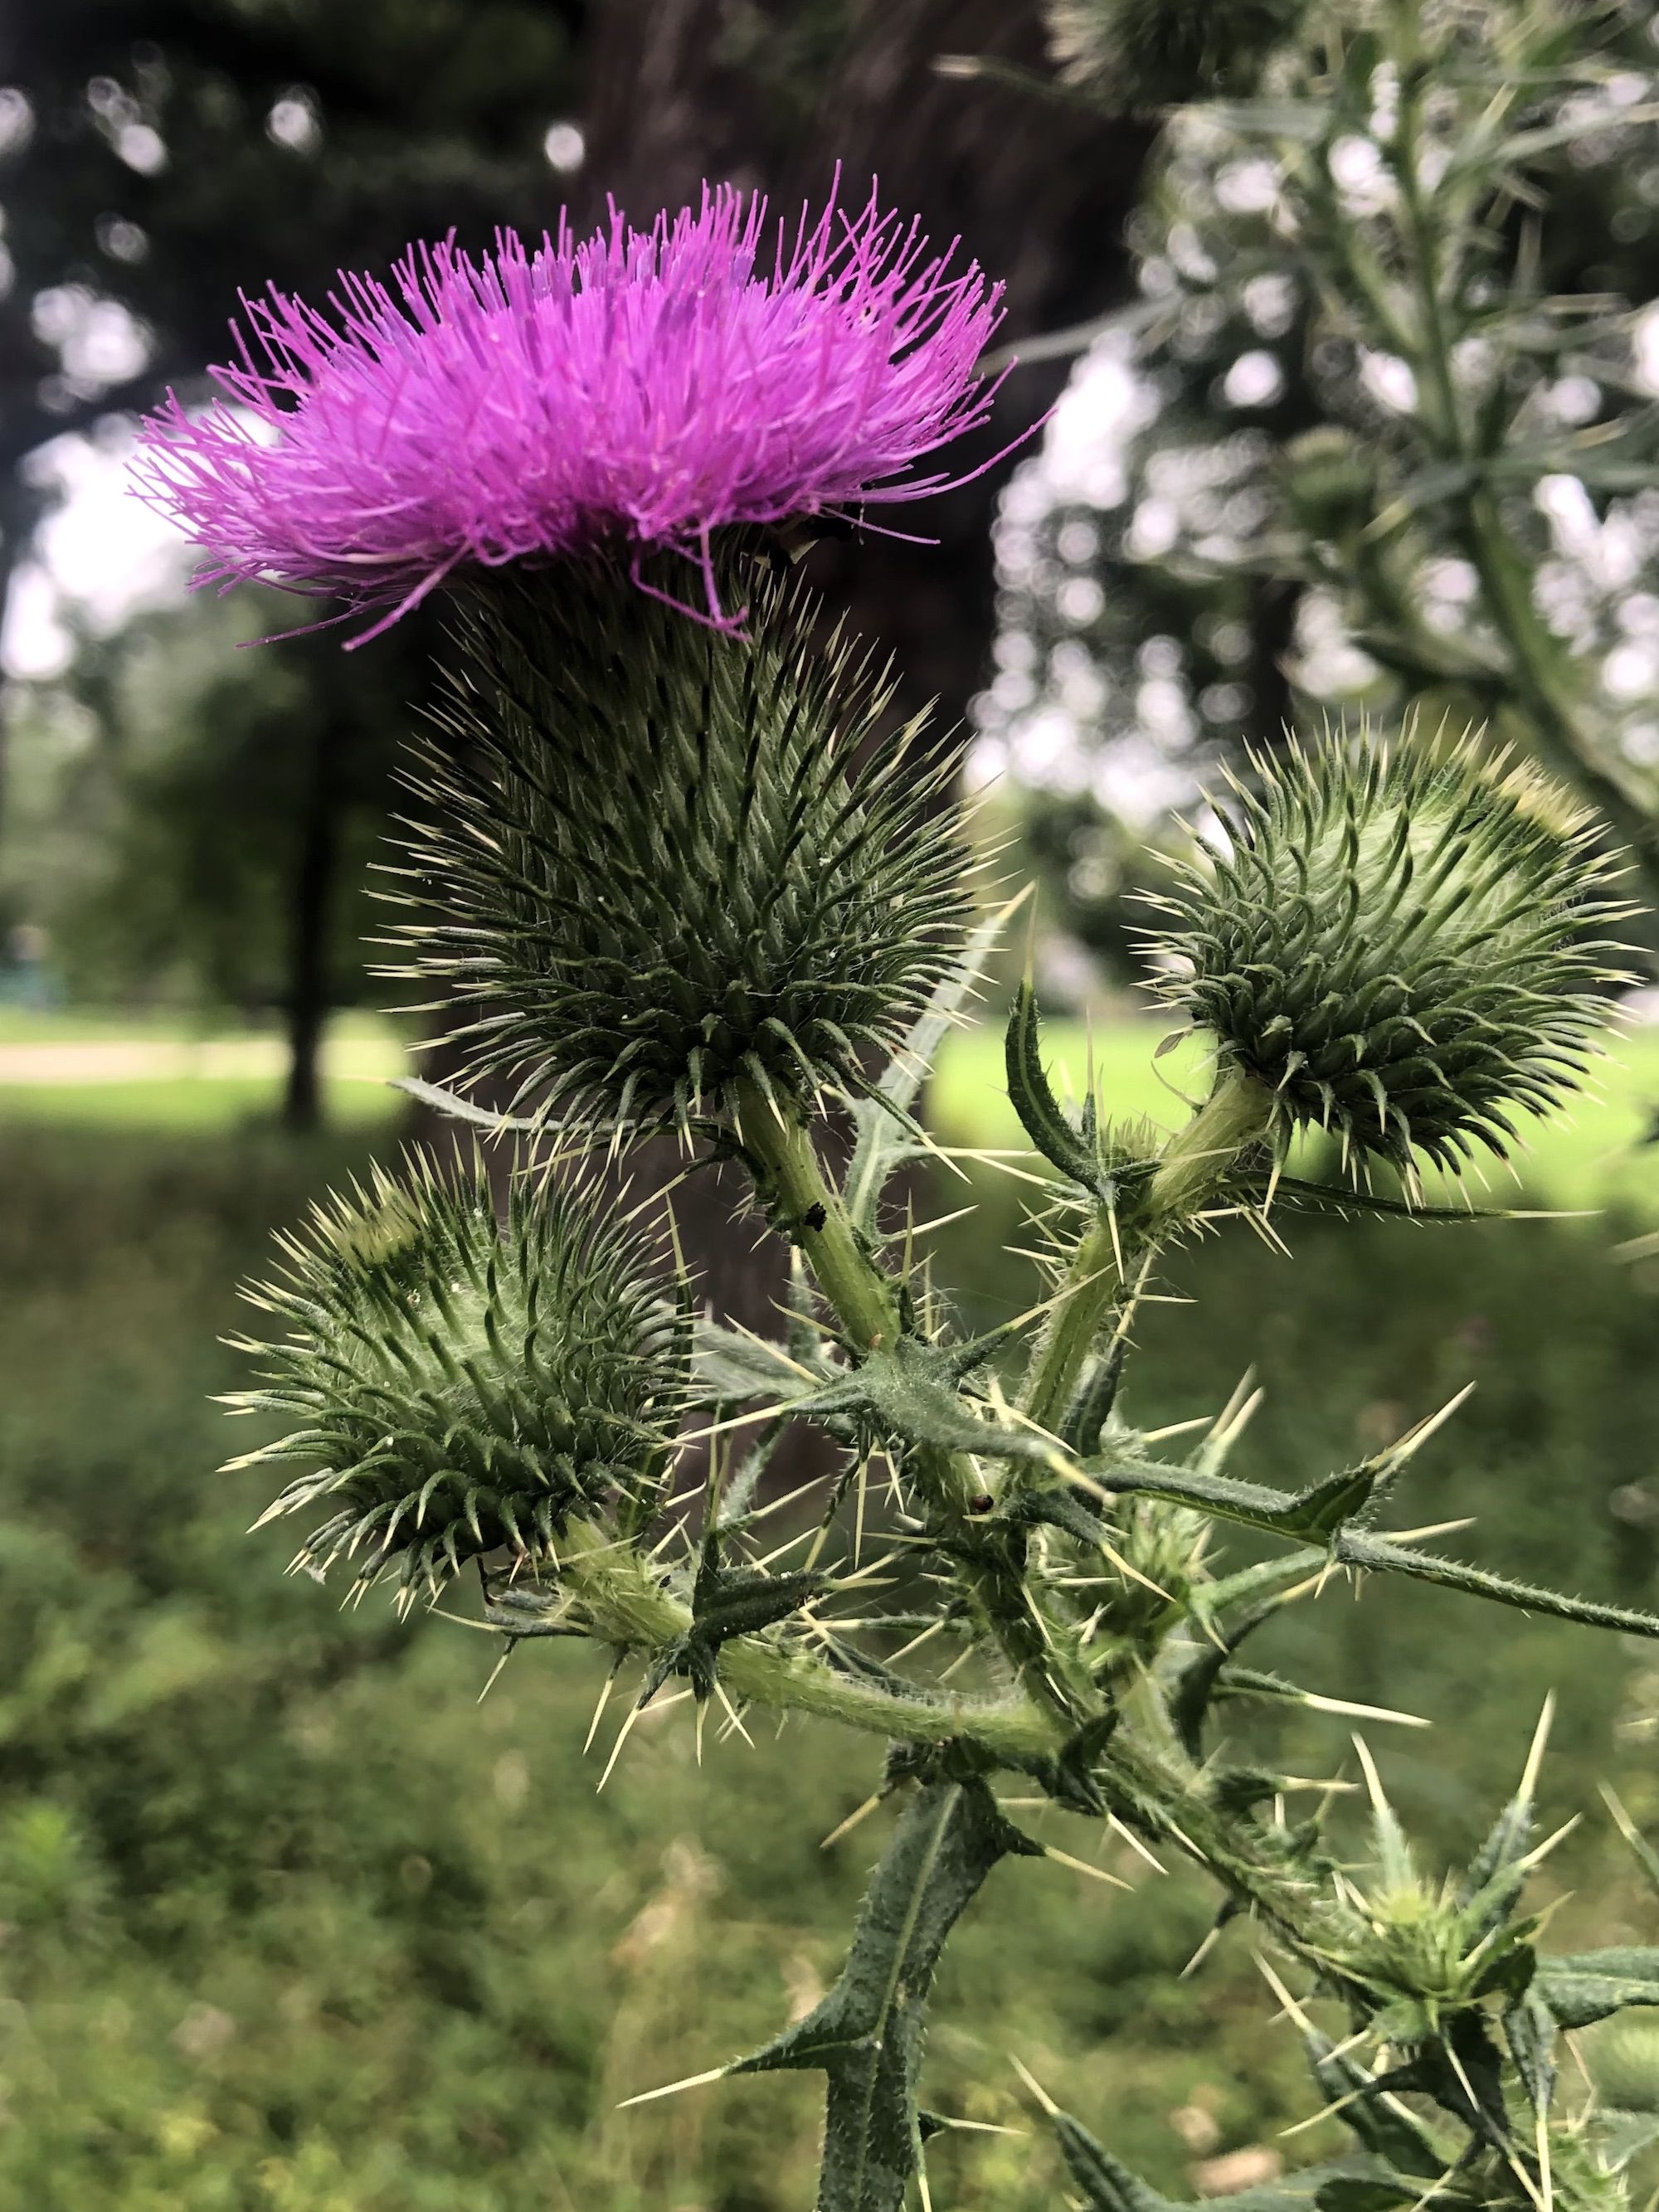 Bull Thistle in Wingra Park in Madison, Wisconsin on August 13, 2022.